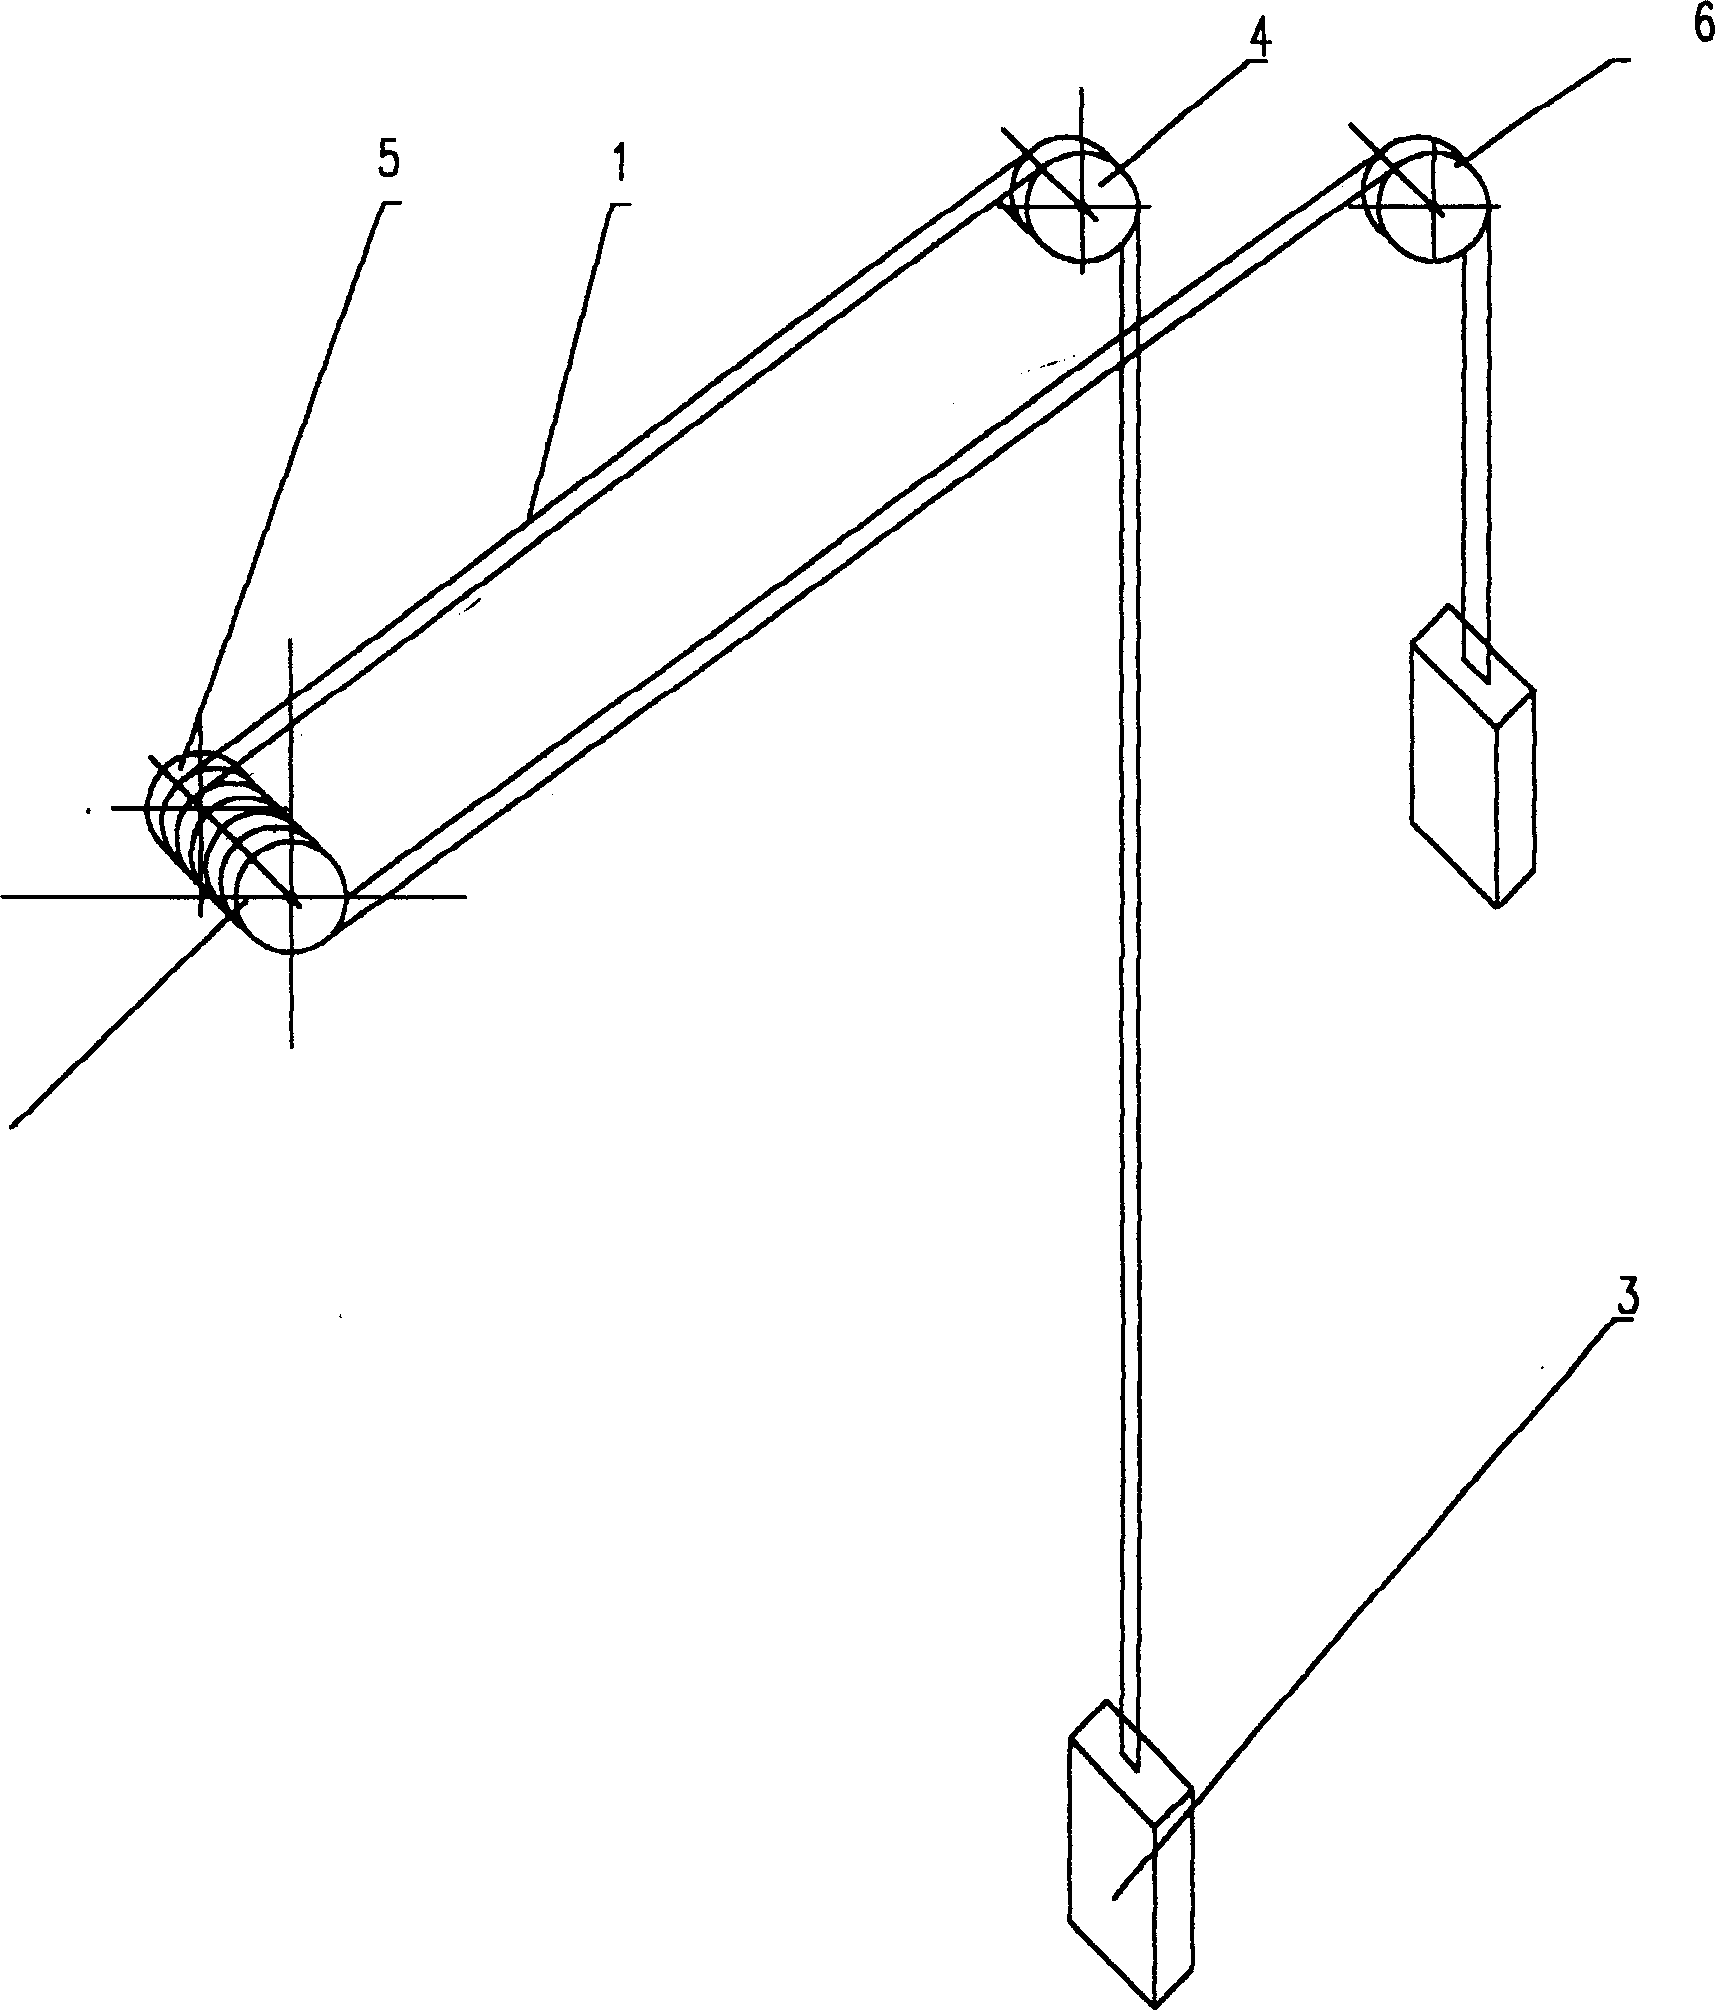 Lifter suspended by multiple cables and balanced by tail cable